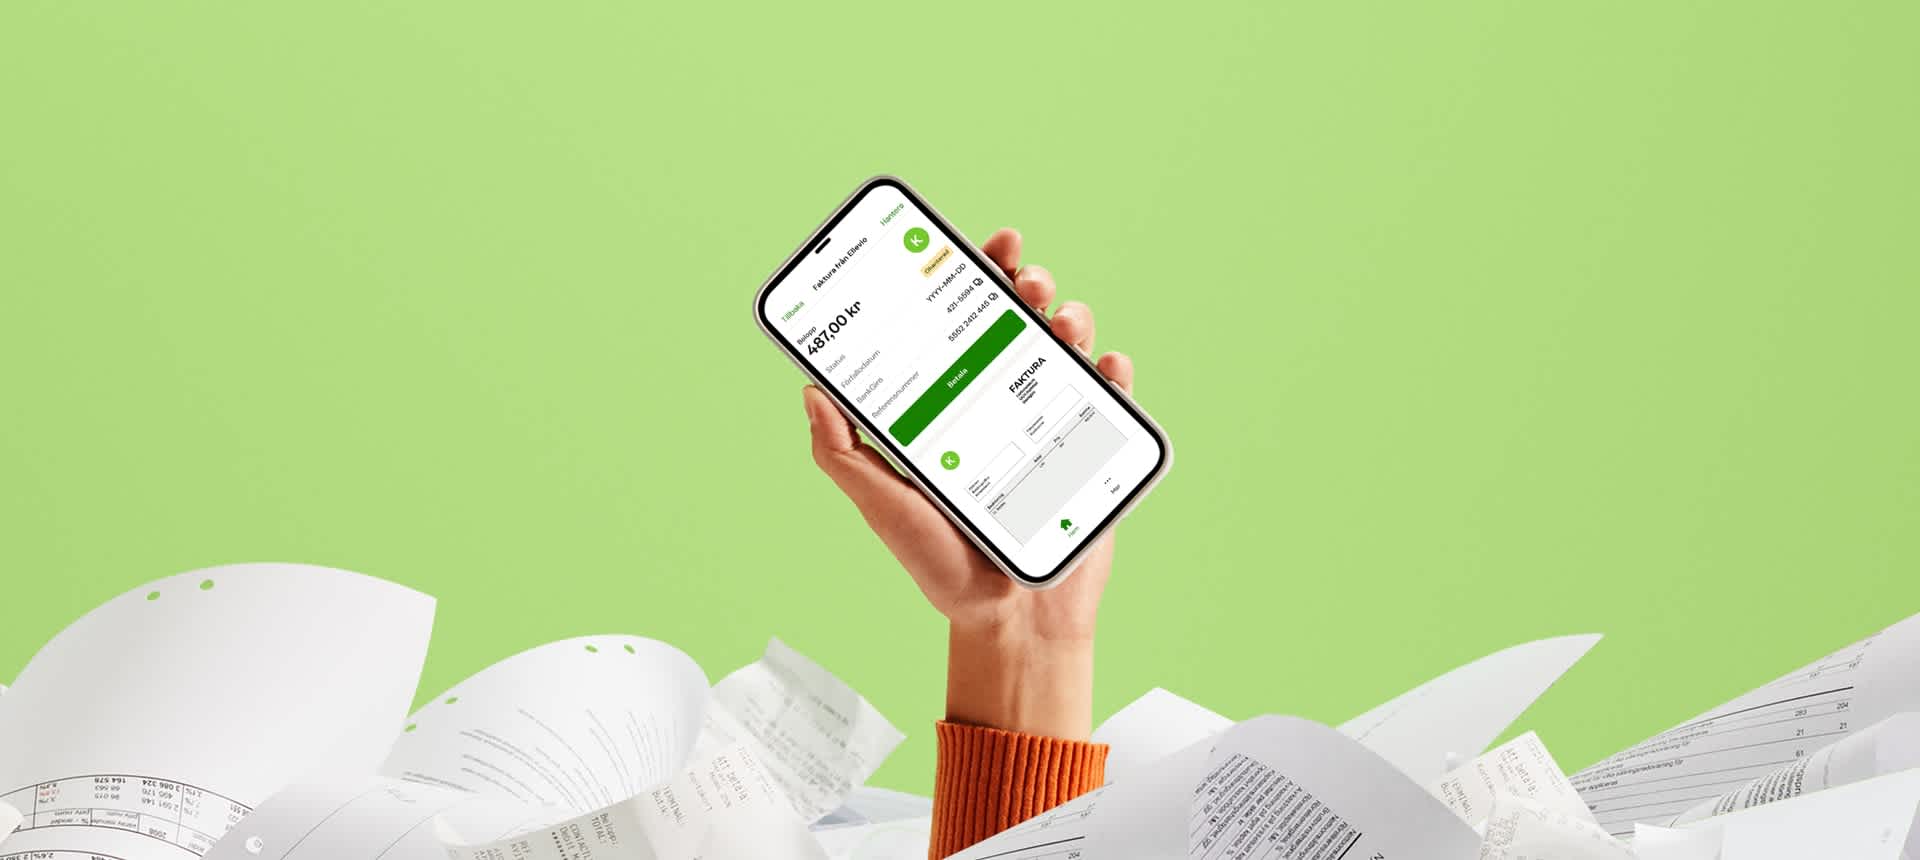 A hand holding a mobile phone with an invoice in Kivra's app on the screen.